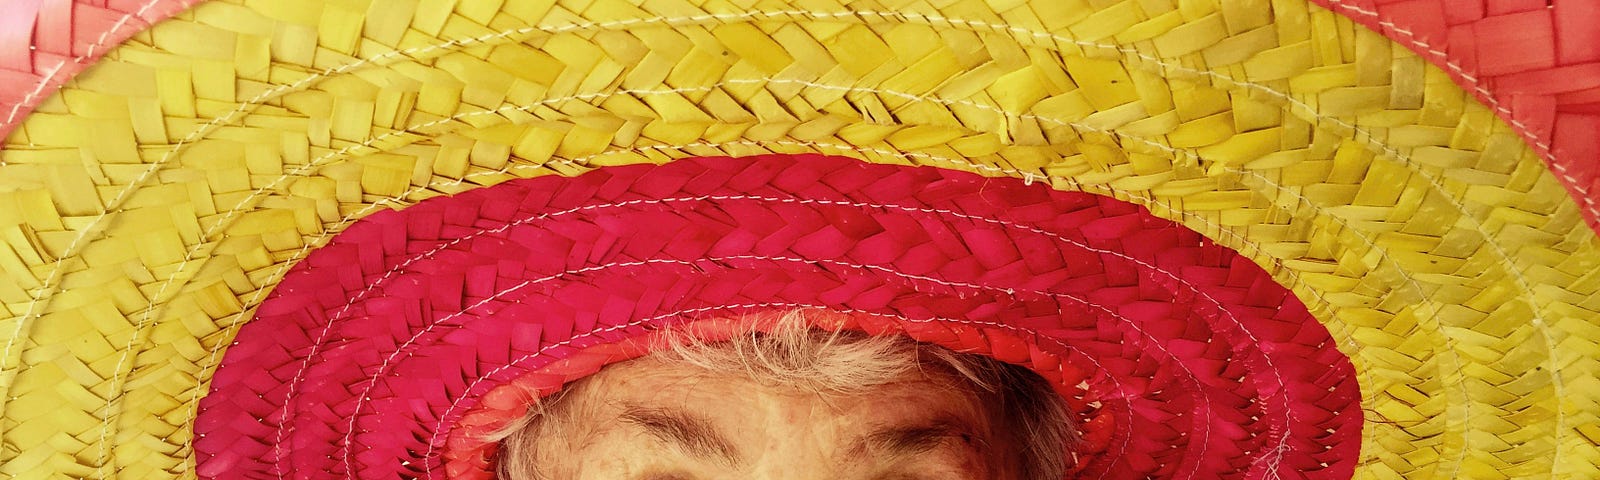 An older woman with a funny look on her face looks into the camera lens from under a giant red and yellow sombrero.